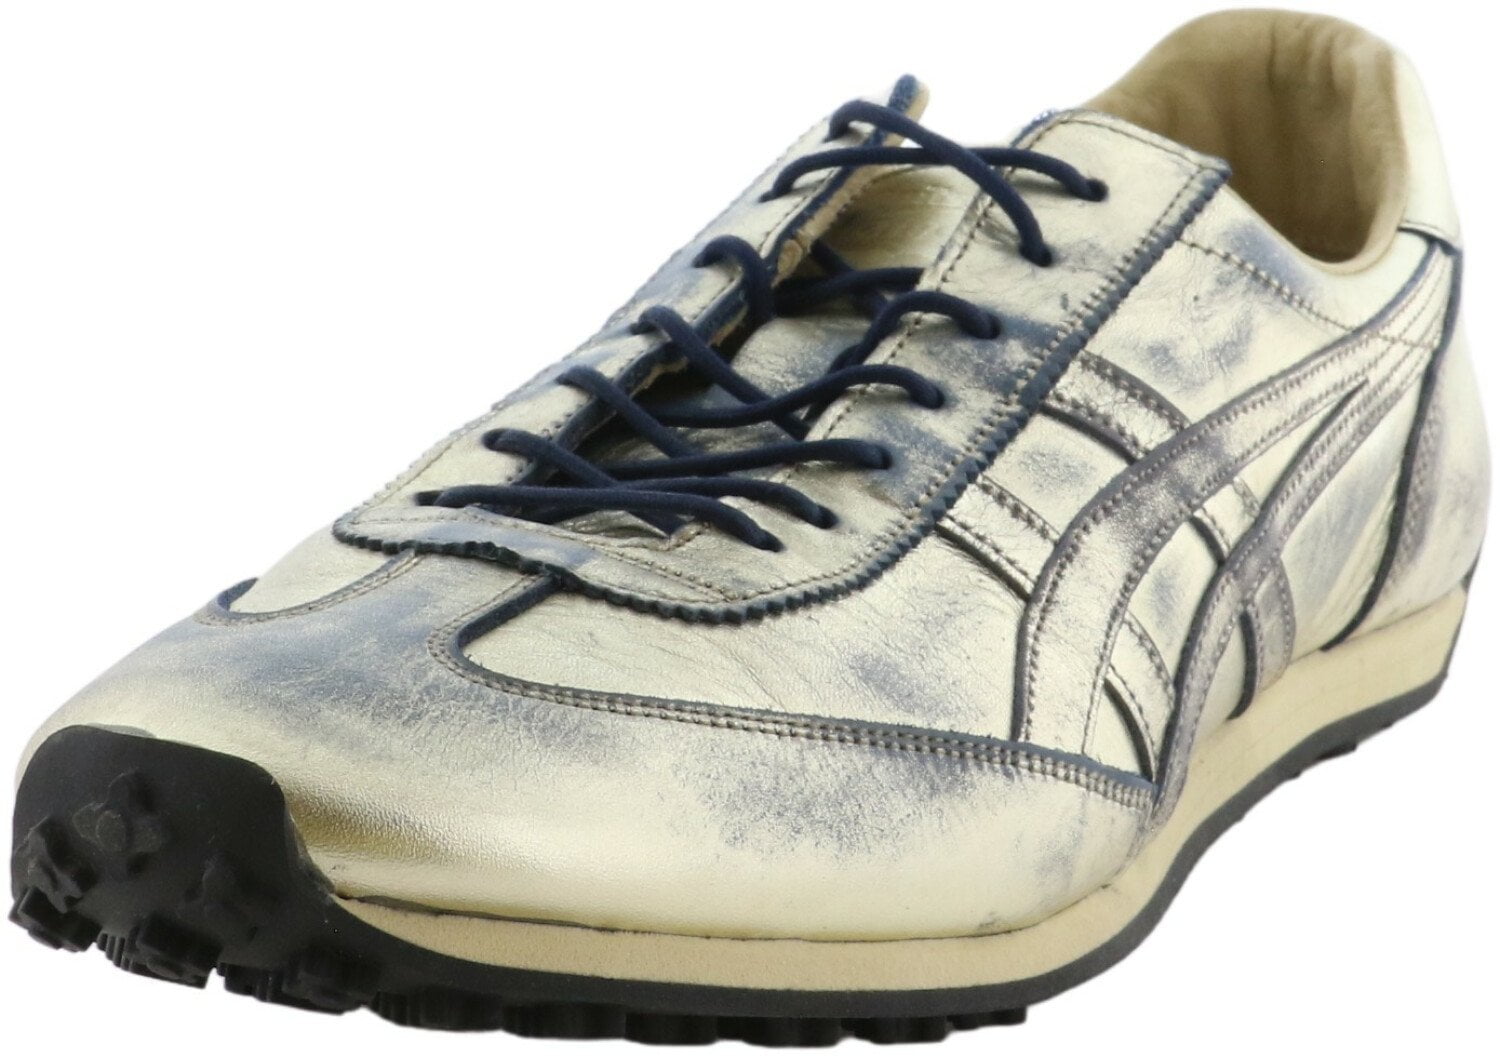 Onitsuka Tiger Edr 78 Deluxe Gold/Navy 